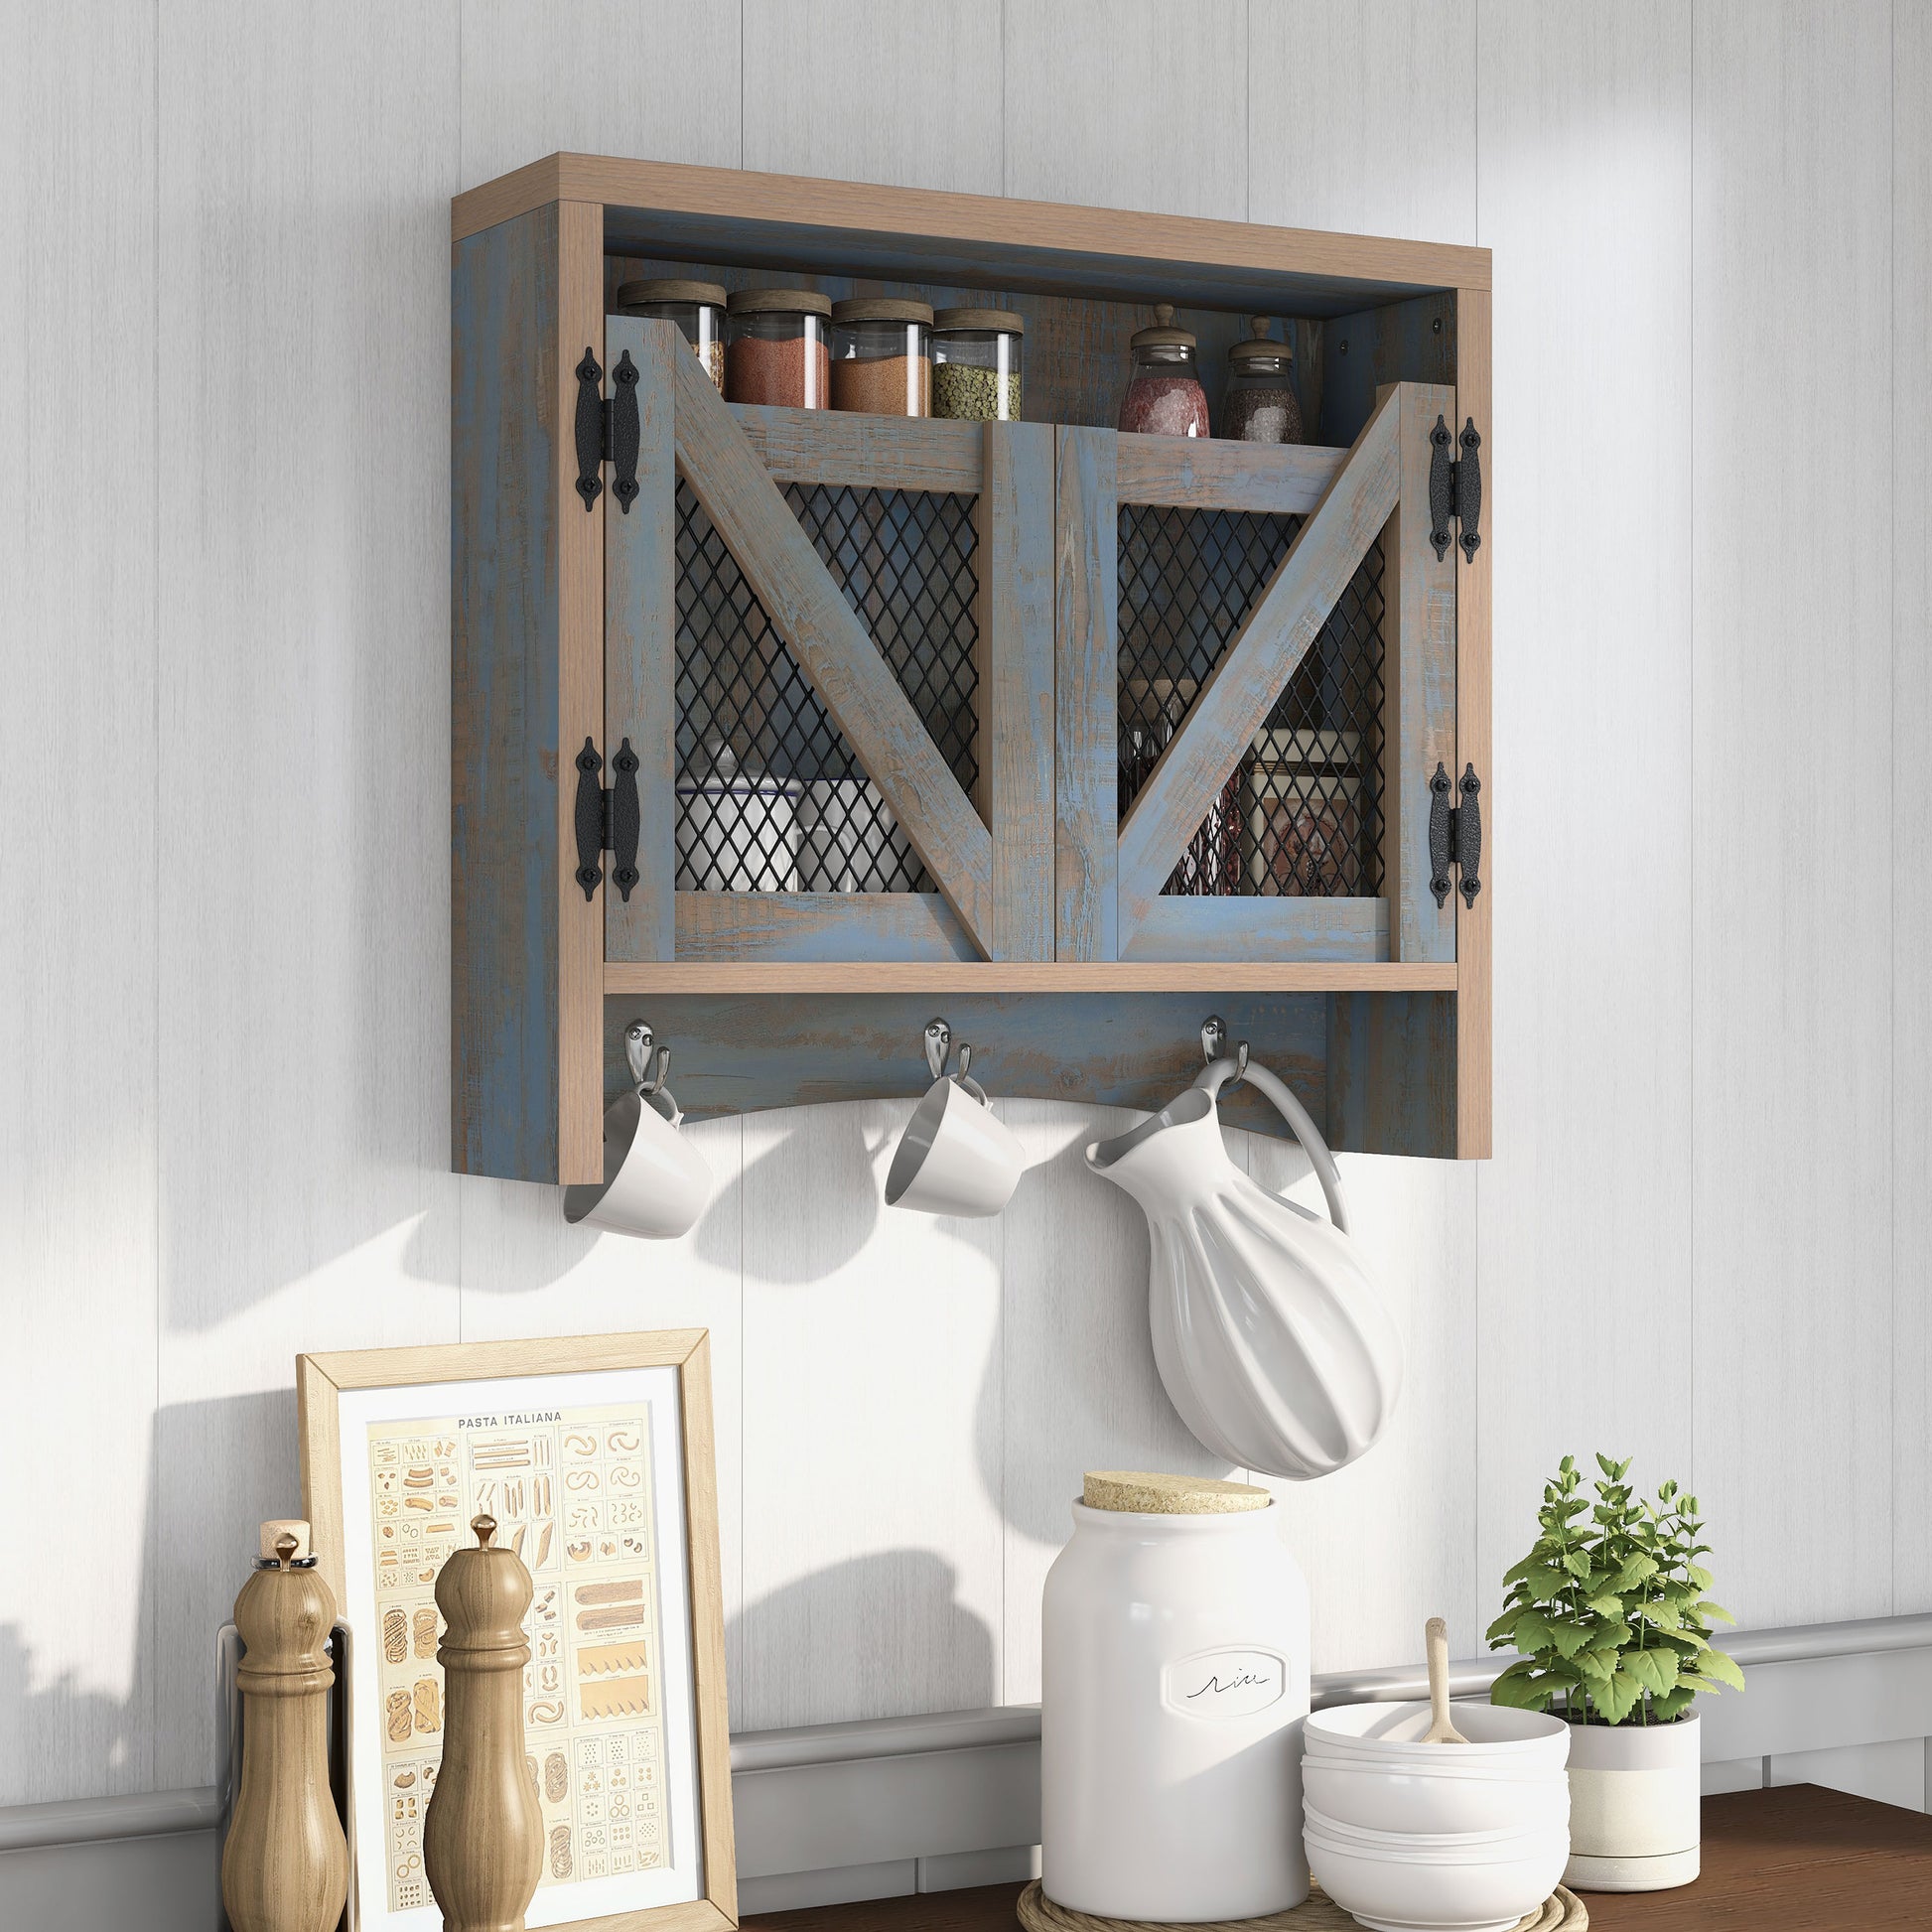 Right angled farmhouse distressed blue wood two-door wall organizer in a kitchen with accessories